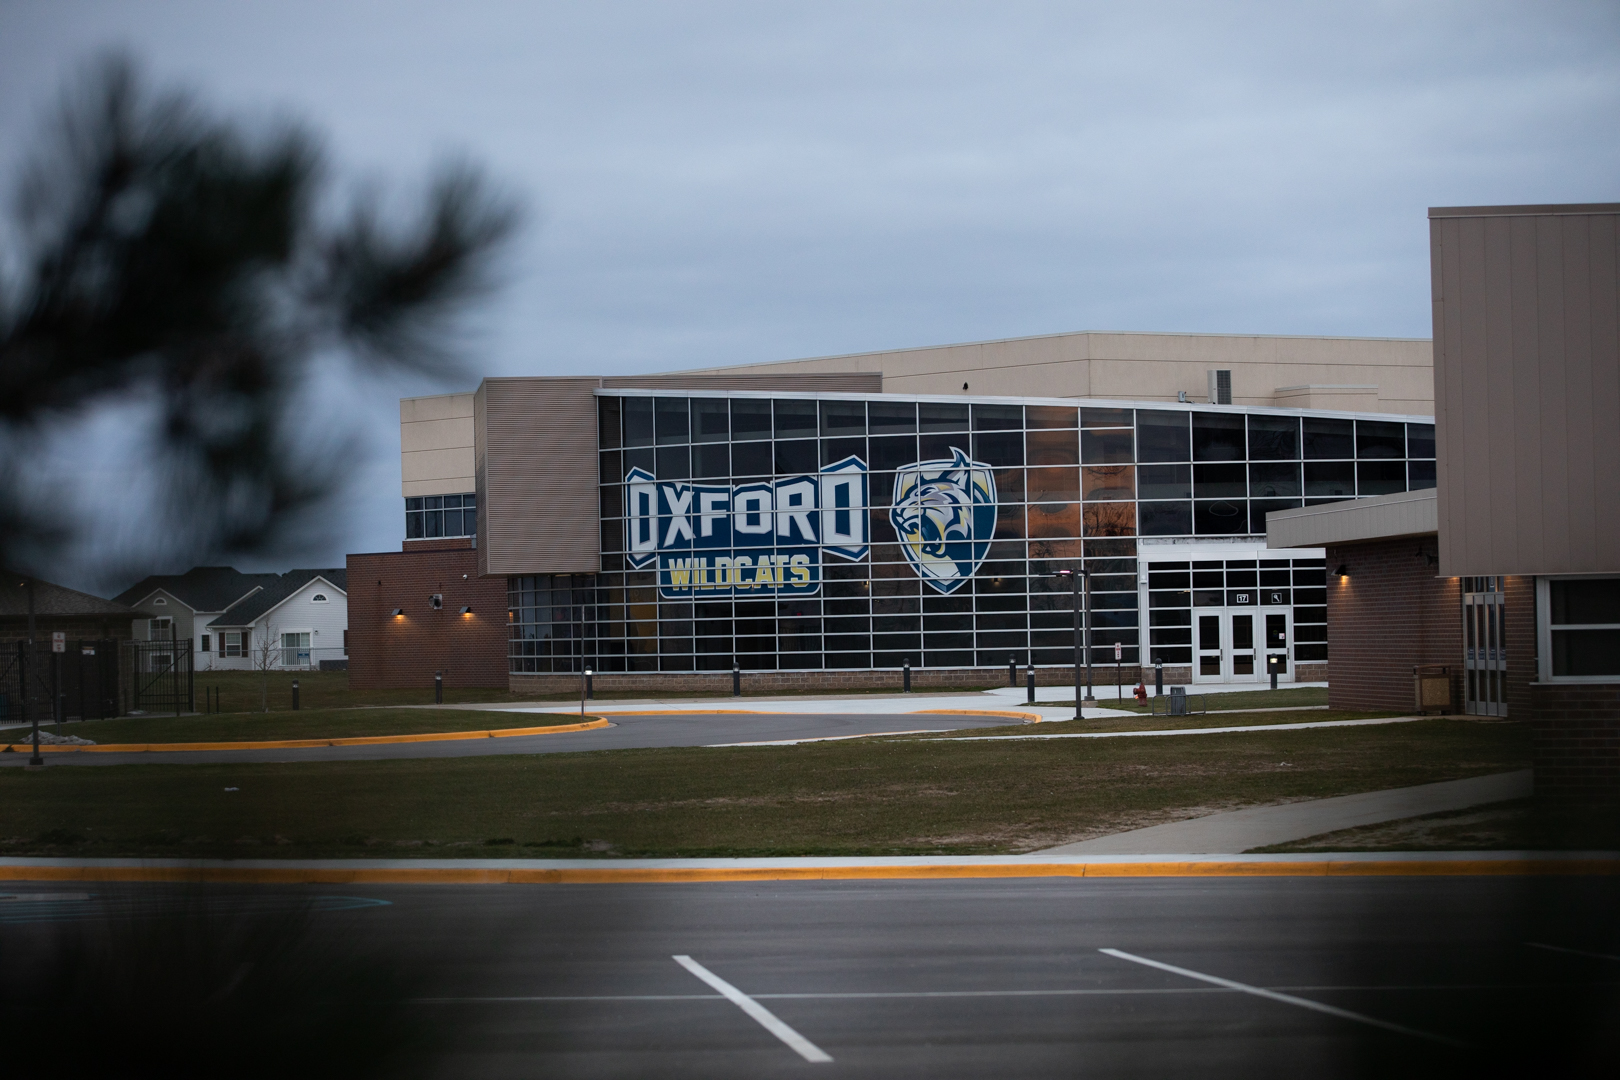 PHOTO: In this Dec. 7, 2021, file photo, a exterior view of Oxford High School is shown in Oxford, Mich.